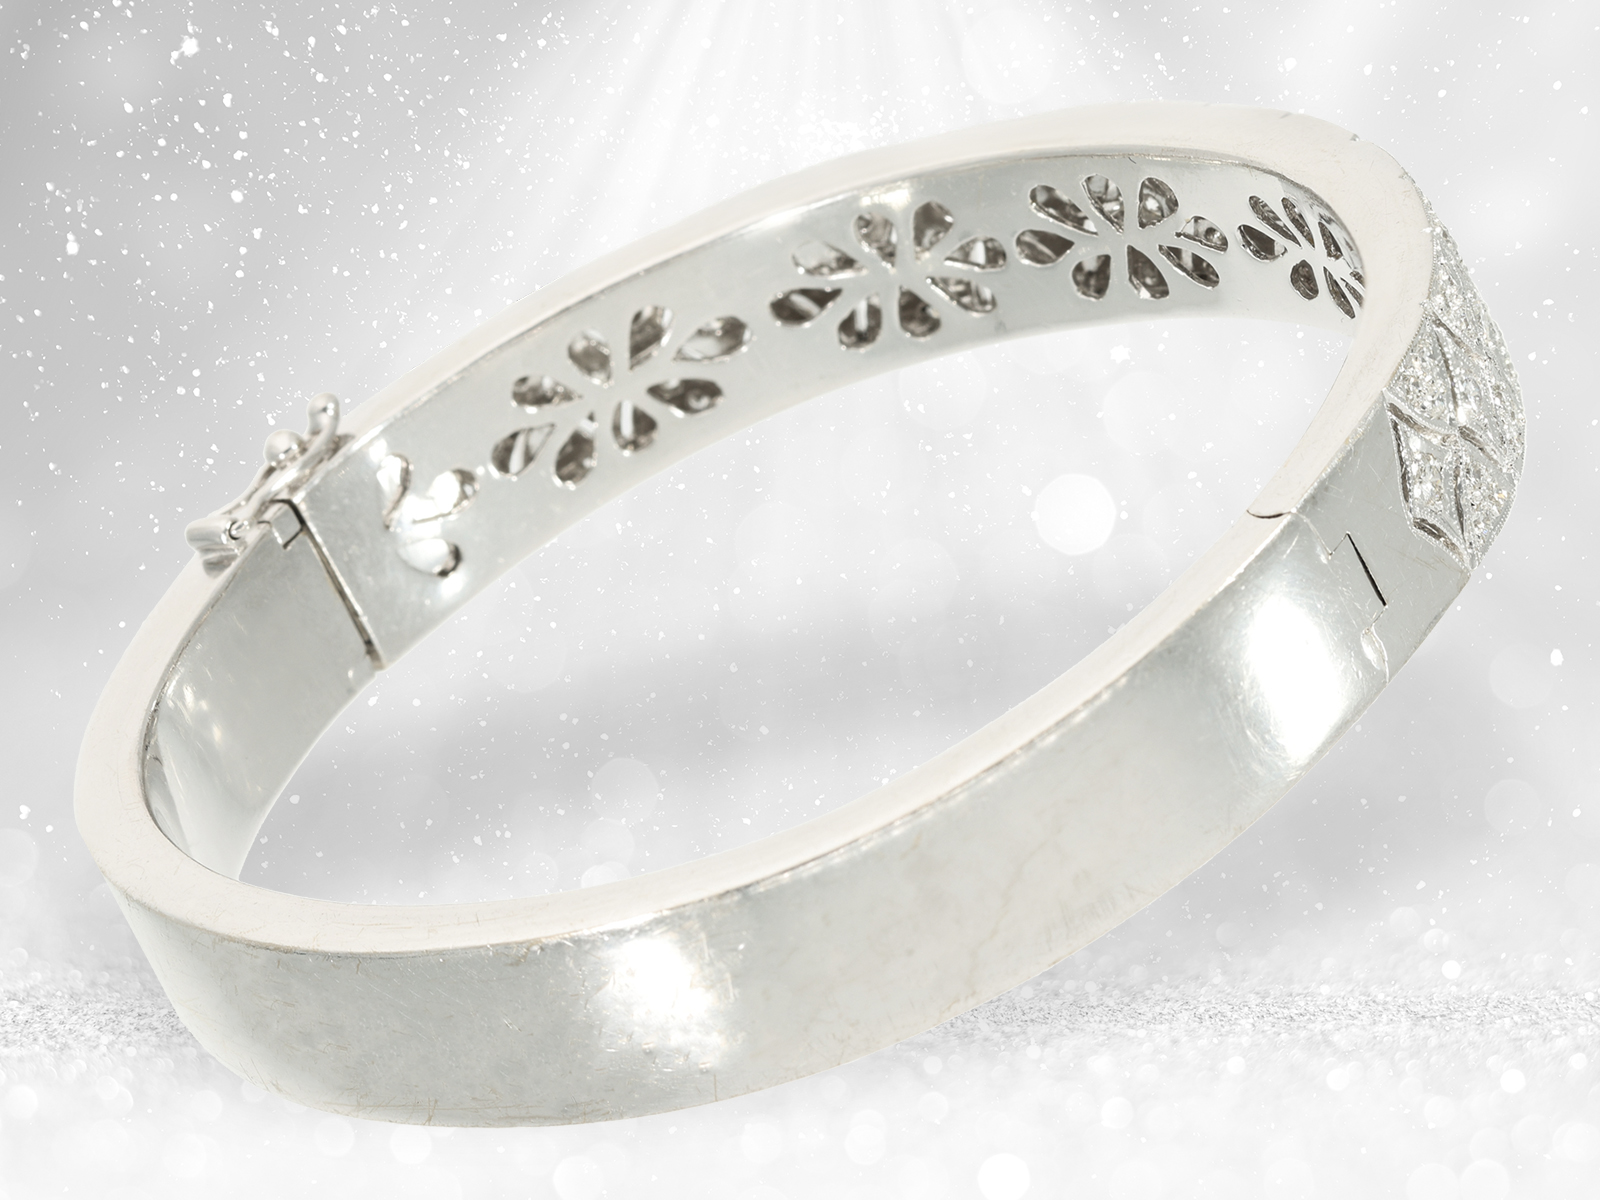 Heavy and high quality white gold bracelet with high quality brilliant-cut diamonds, approx. 1.2ct - Image 4 of 4